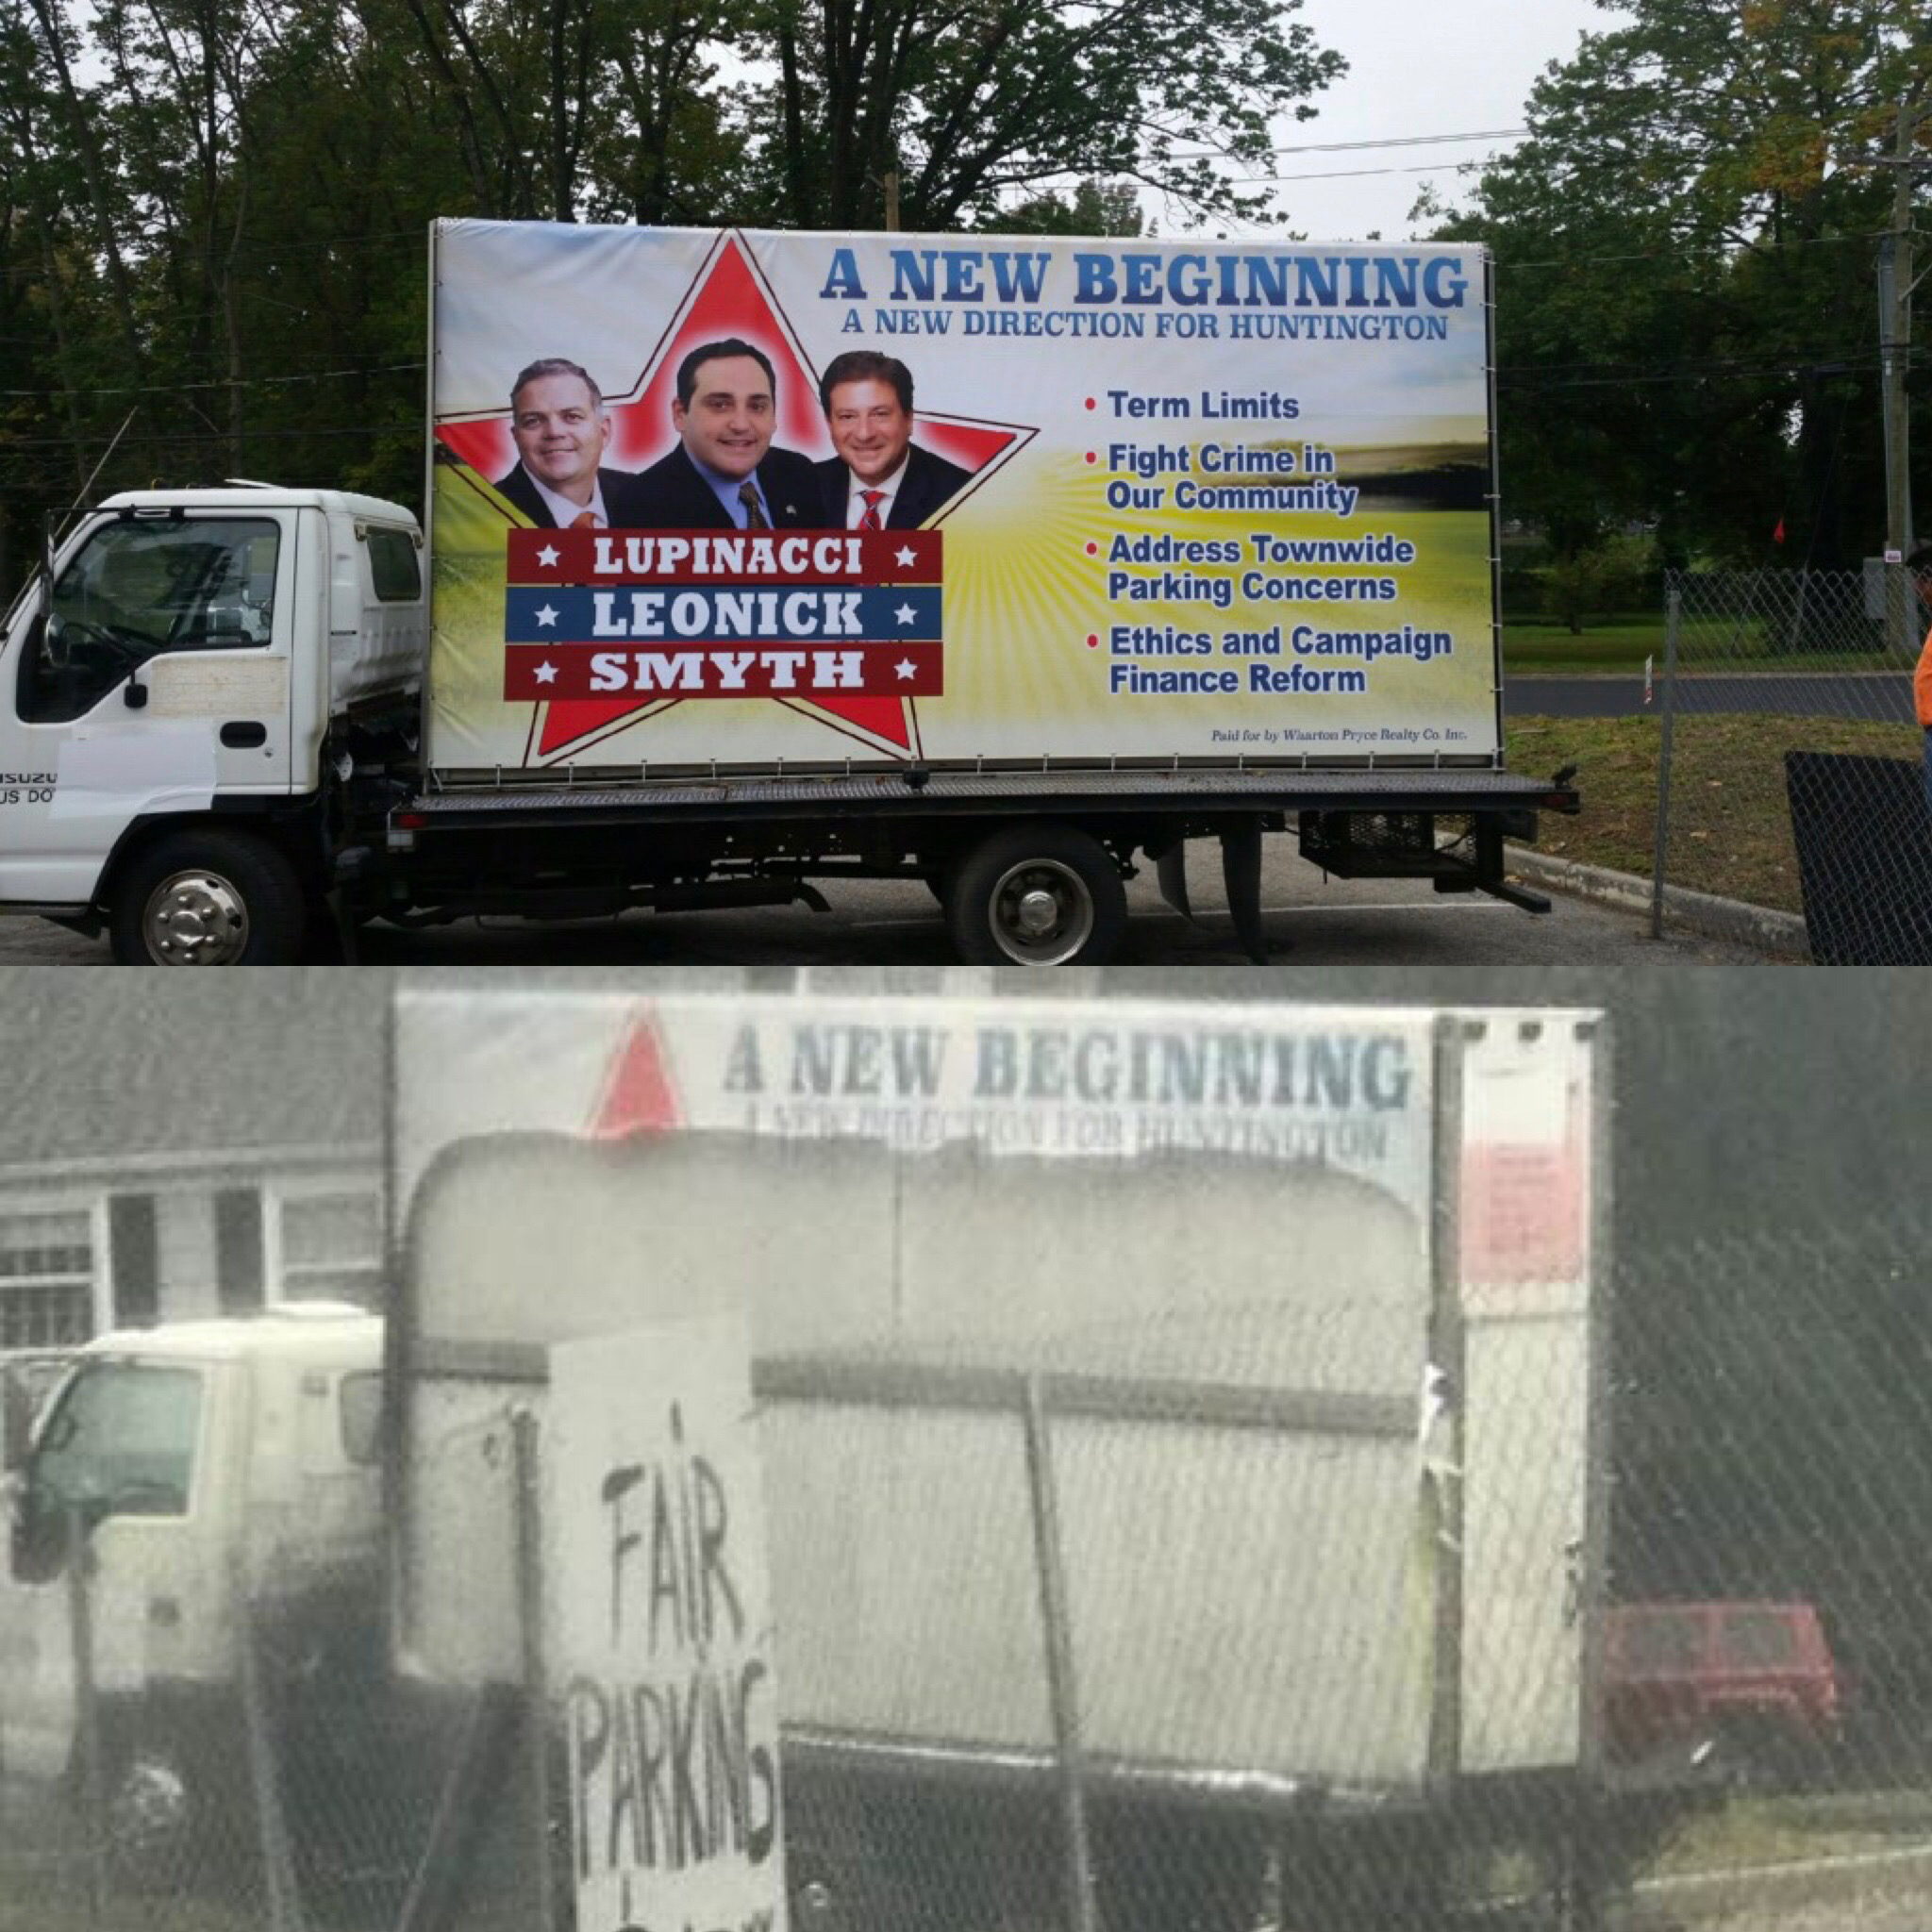   The before, above, and after of a truck with political banners on its sides parked on private property in Huntington that was vandalized over Columbus Day weekend.  